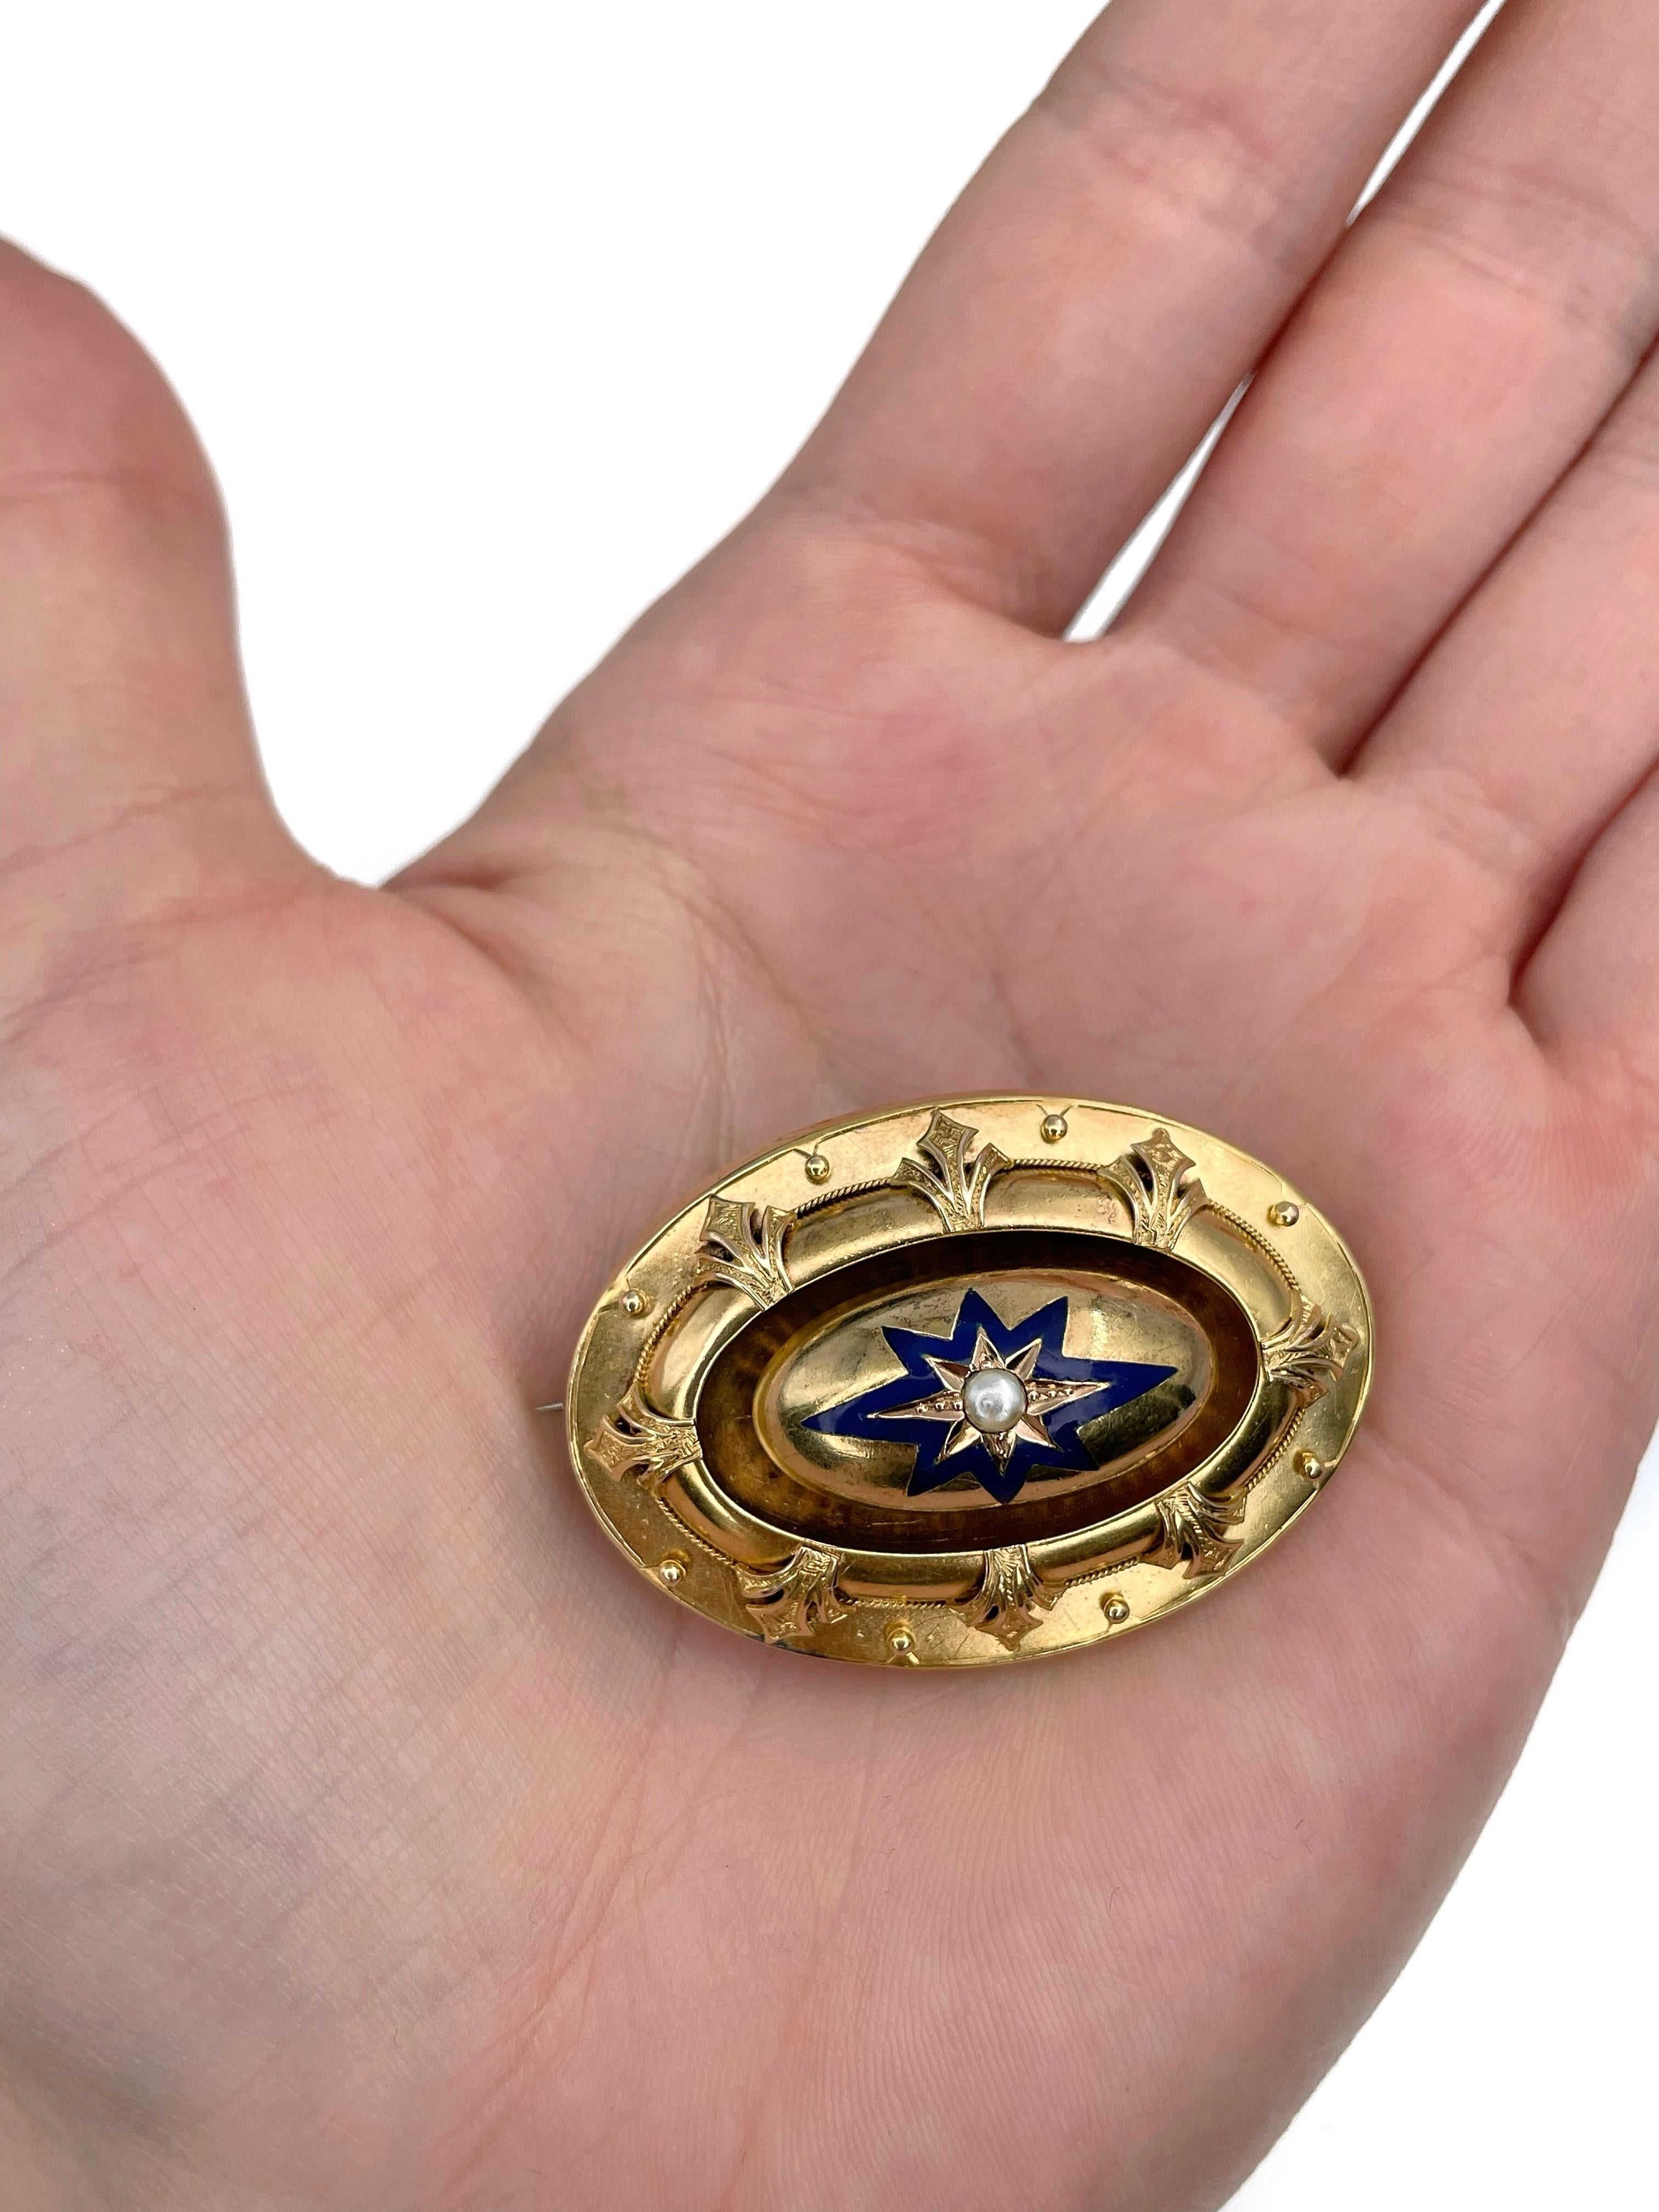 This is a Victorian Etruscan Revival locket pin brooch crafted in 15K yellow gold. 

The piece has an eight pointed royal blue enamel work star. Bead set in the center is a round natural pearl. 

On the back there is a space with a removable framed